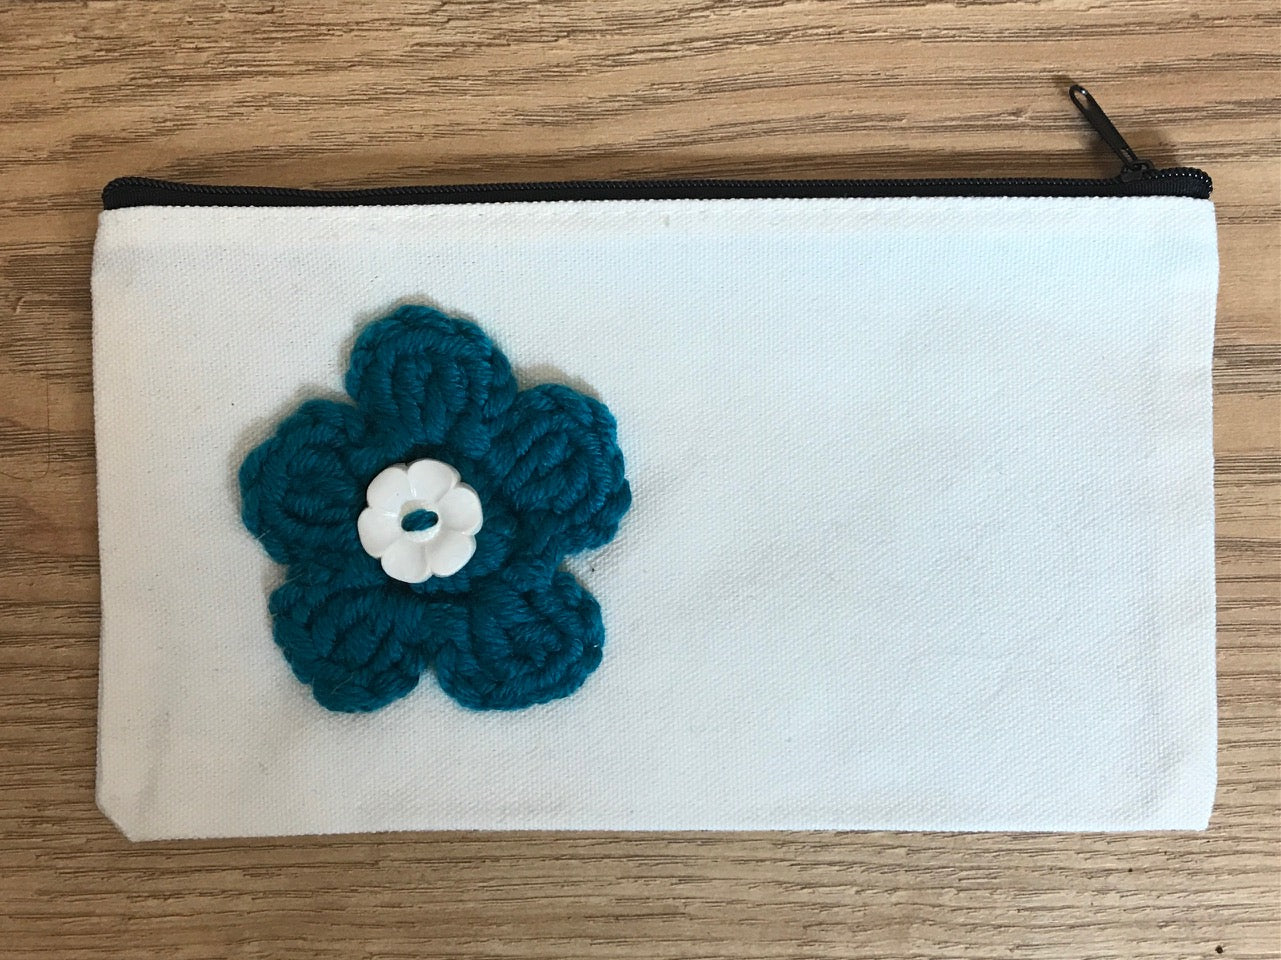 Canvas pouches with hand crocheted decoration